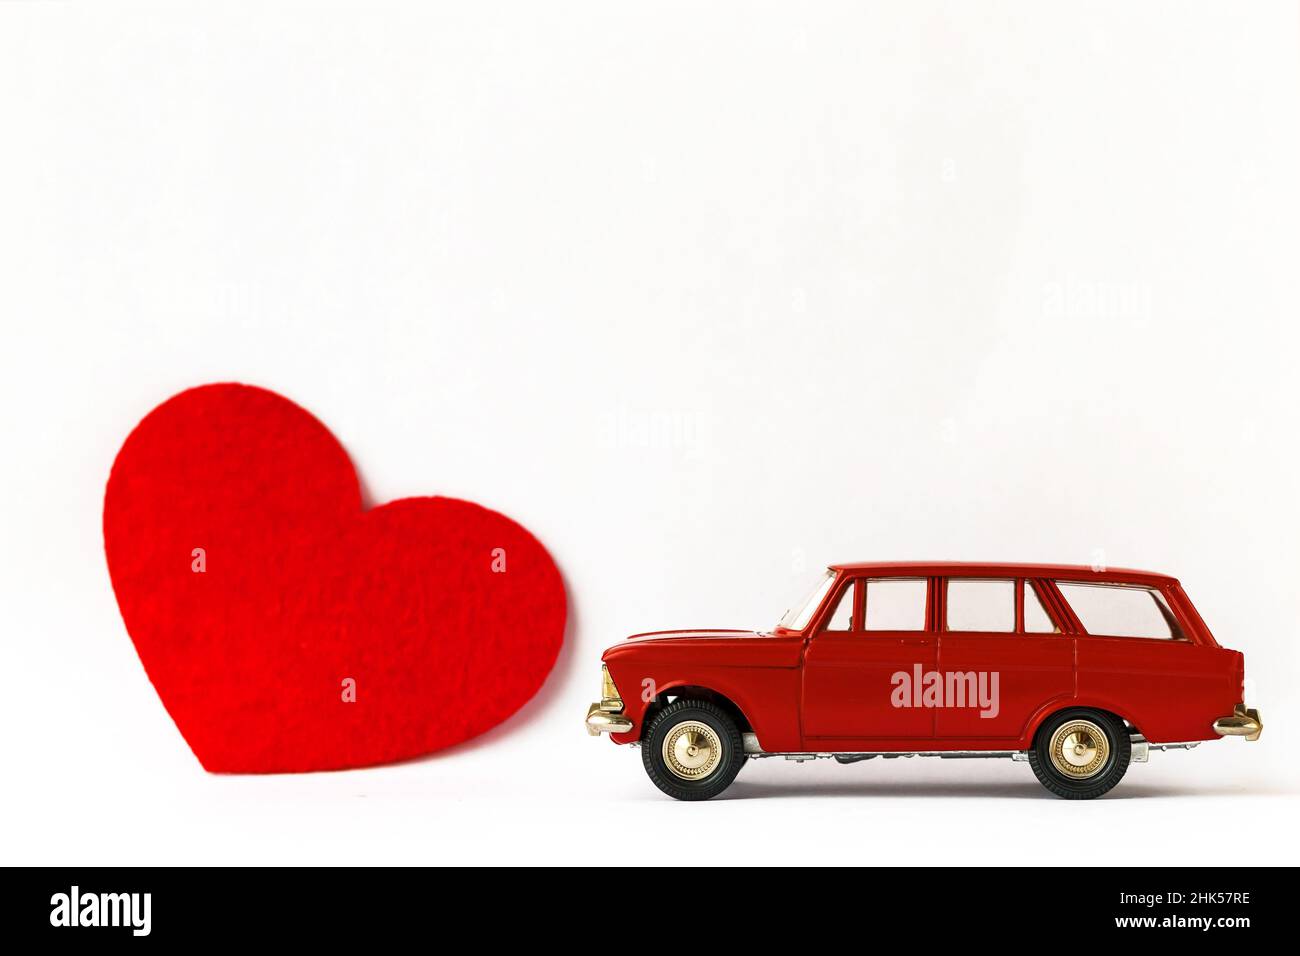 Red metal retro toy car and heart on white background. Valentine's day concept Stock Photo